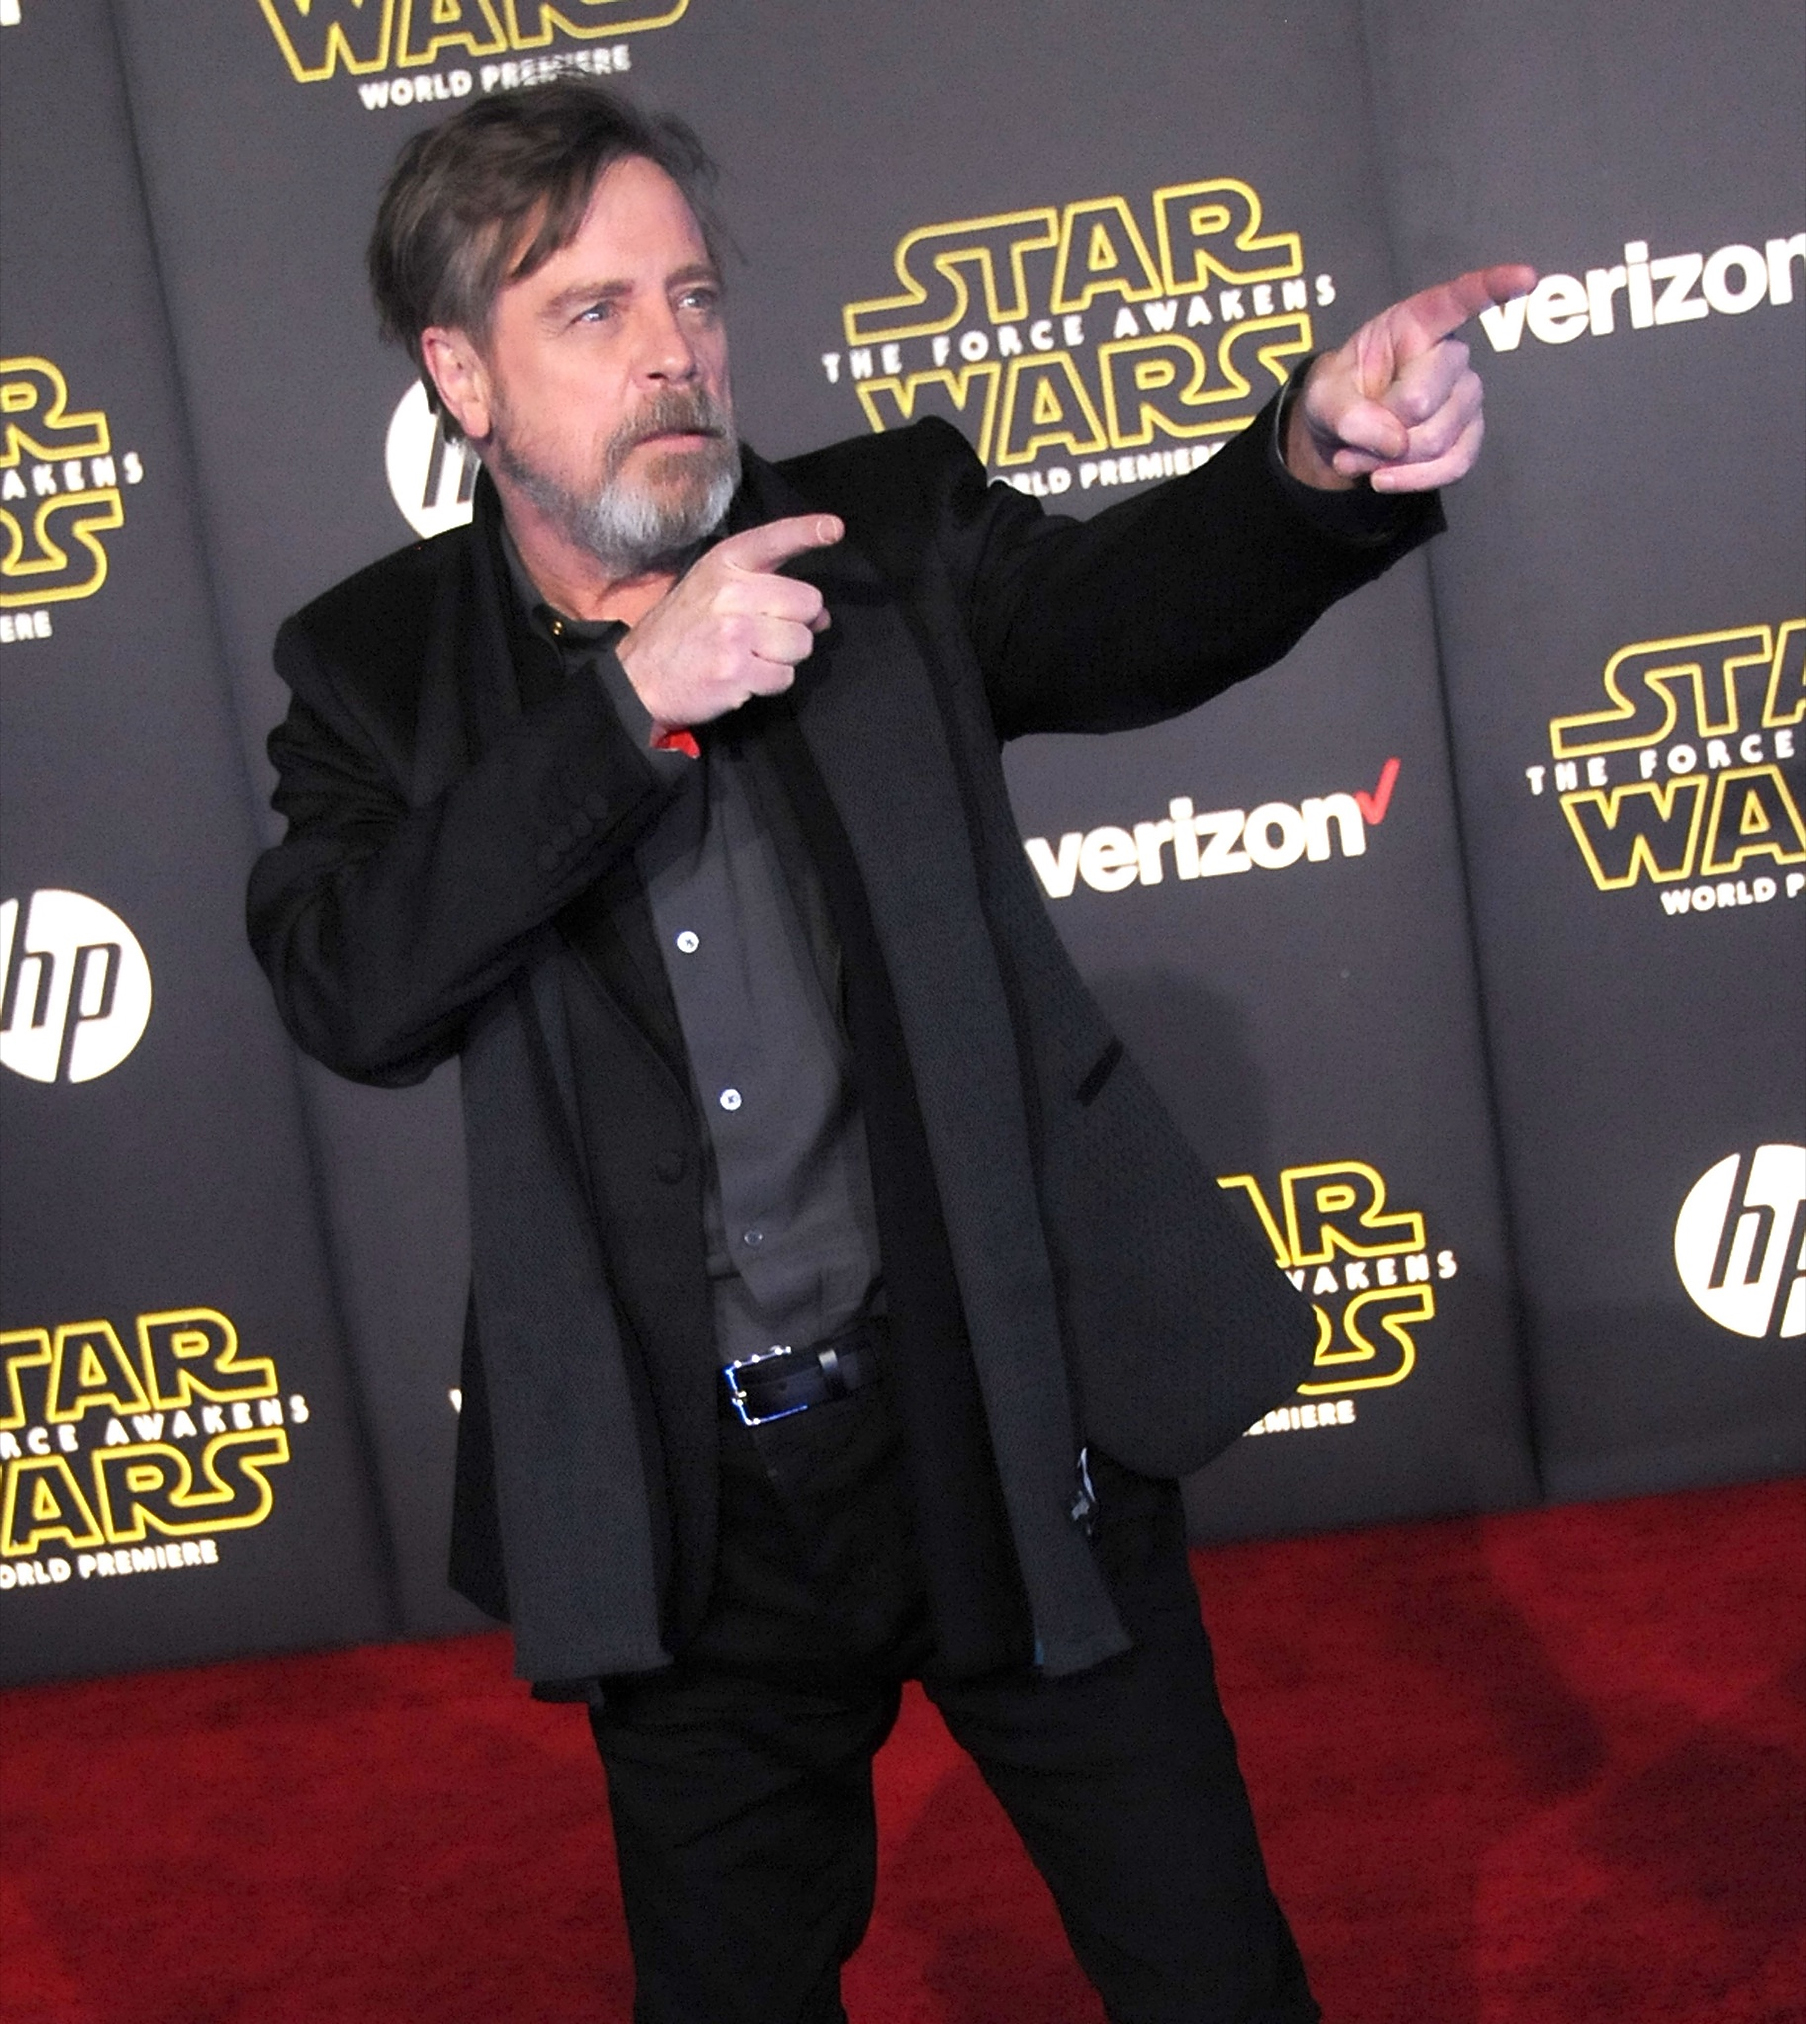 'Star Wars The Force Awakens' star Mark Hamill shows off dramatic